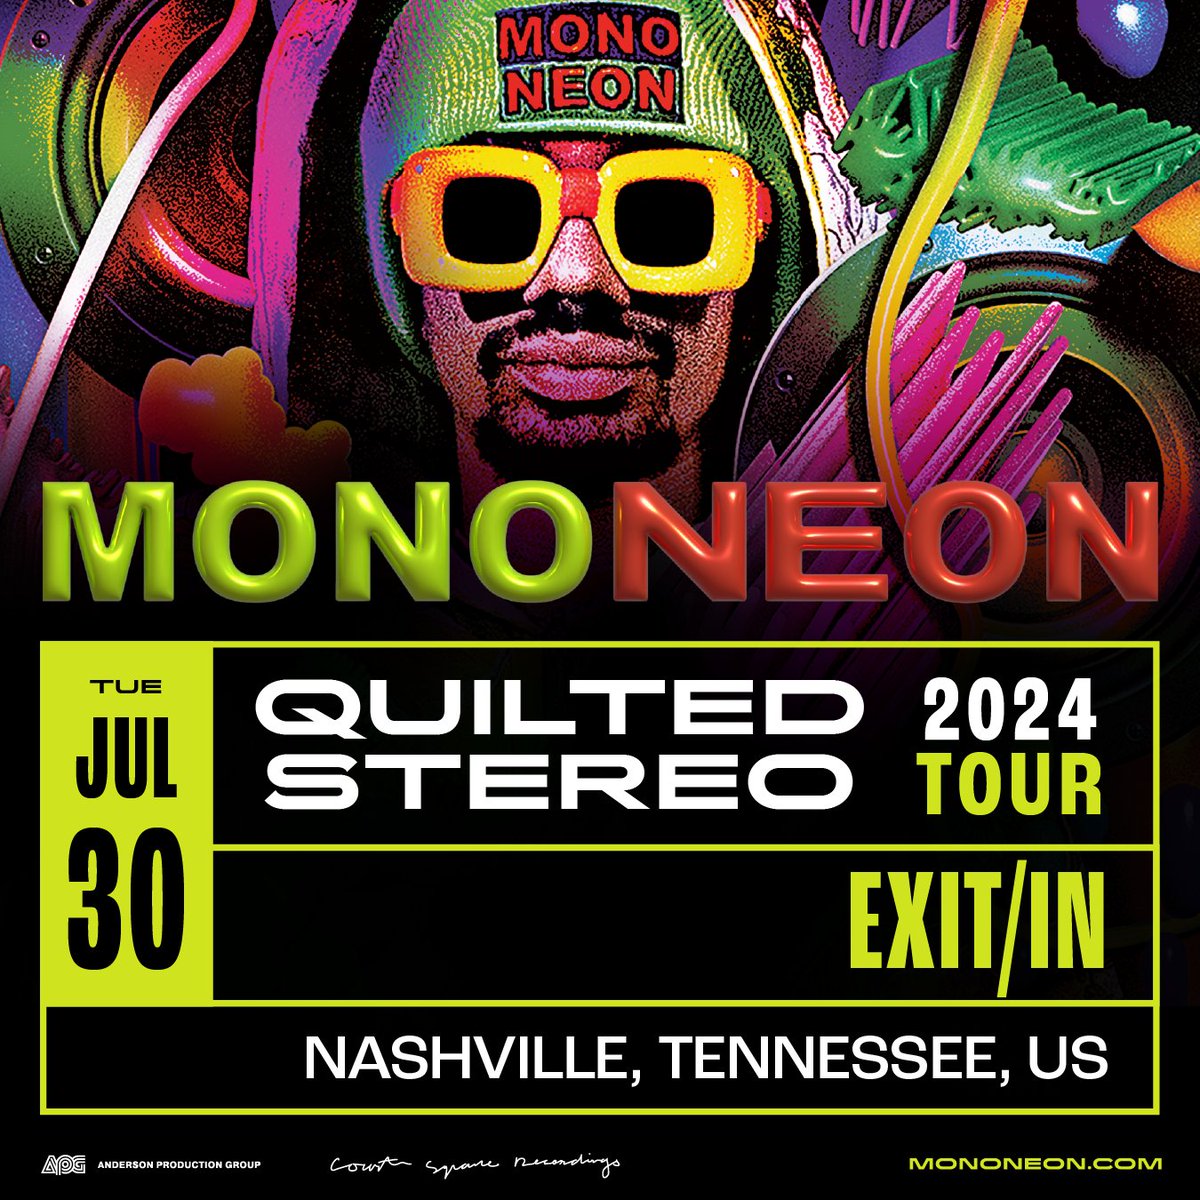 JUST ANNOUNCED! Mononeon is bringing the Quilted Stereo tour to Exit/In on July 30th! Get your tickets to see the musician that Flea from the Chili Peppers claims to be, 'The greatest F***cking electric bass player.' Tickets on sale Wednesday at 10AM at ExitIn.com 🎟️